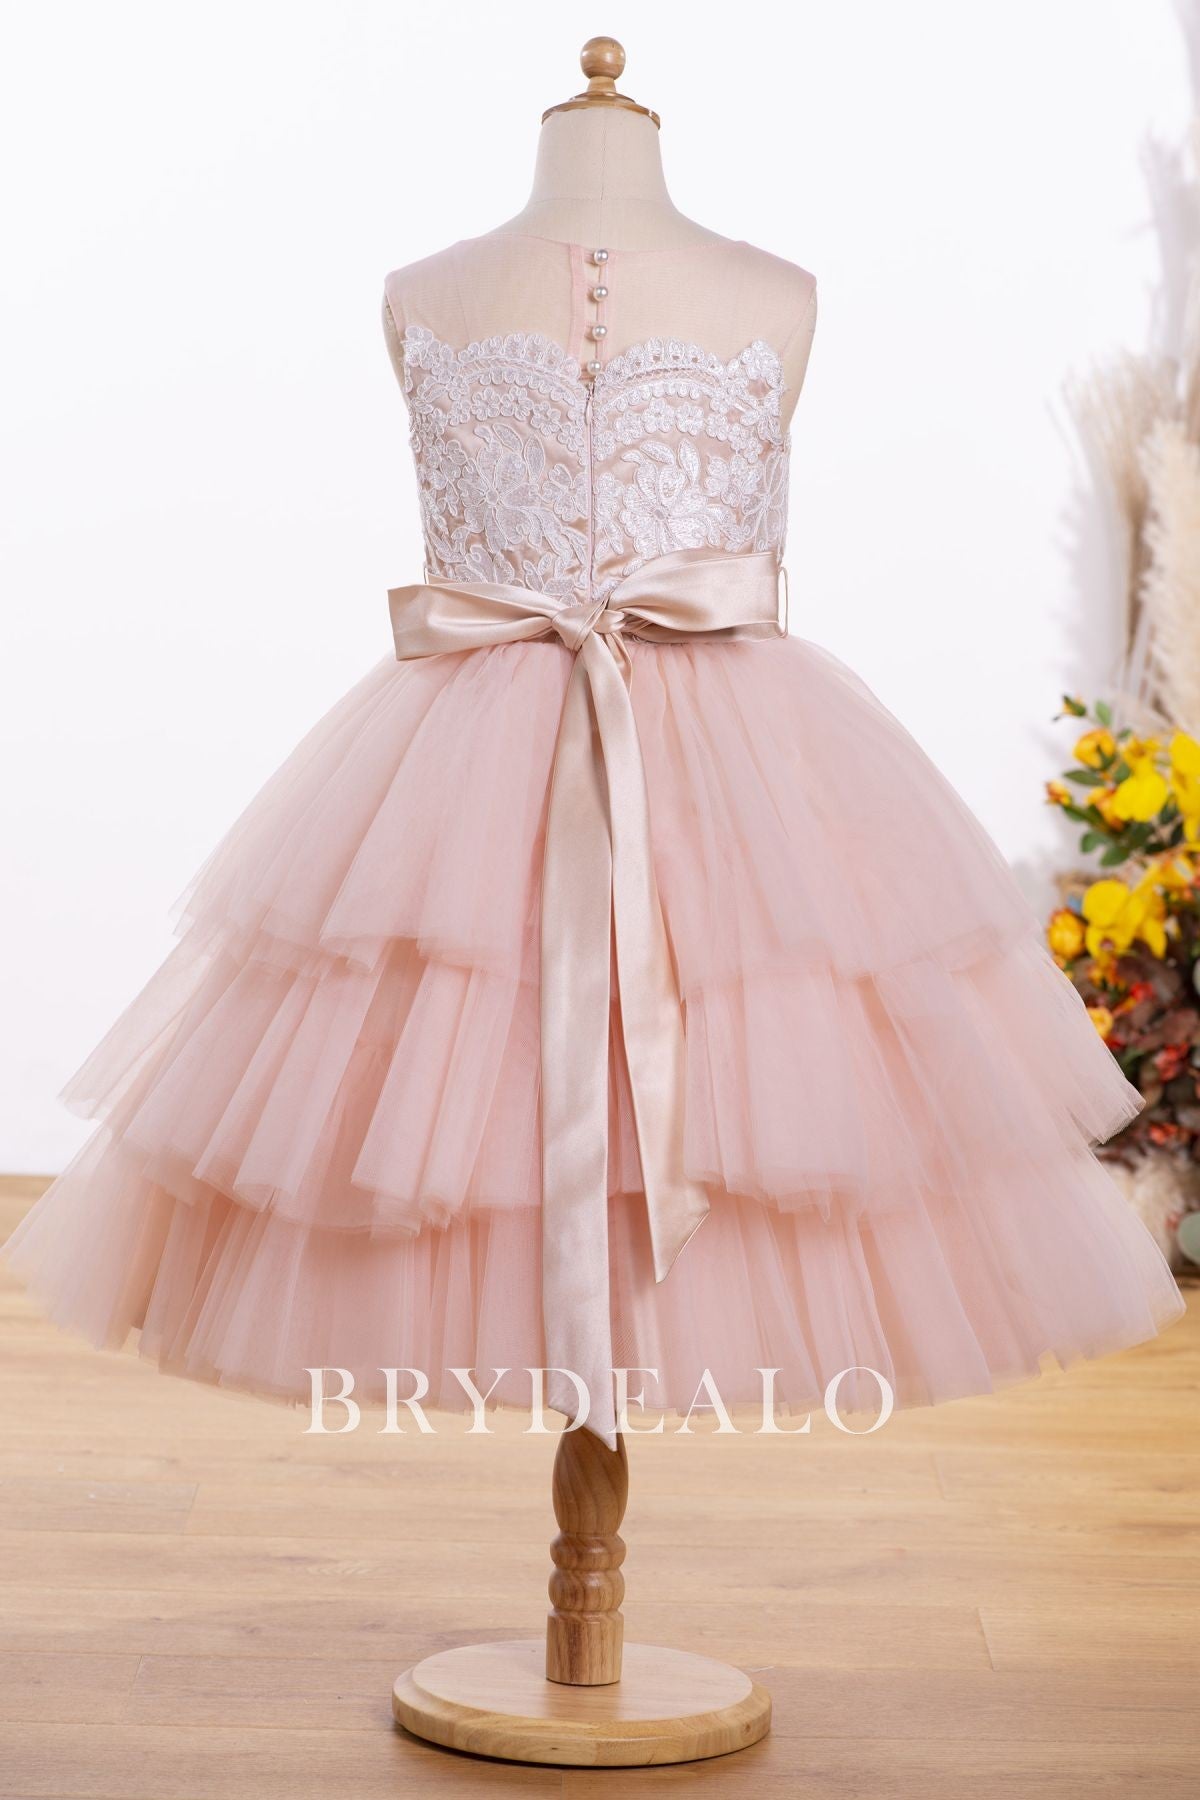 Illusion Back Pink Knee Length Tiered Flower Girl Dress